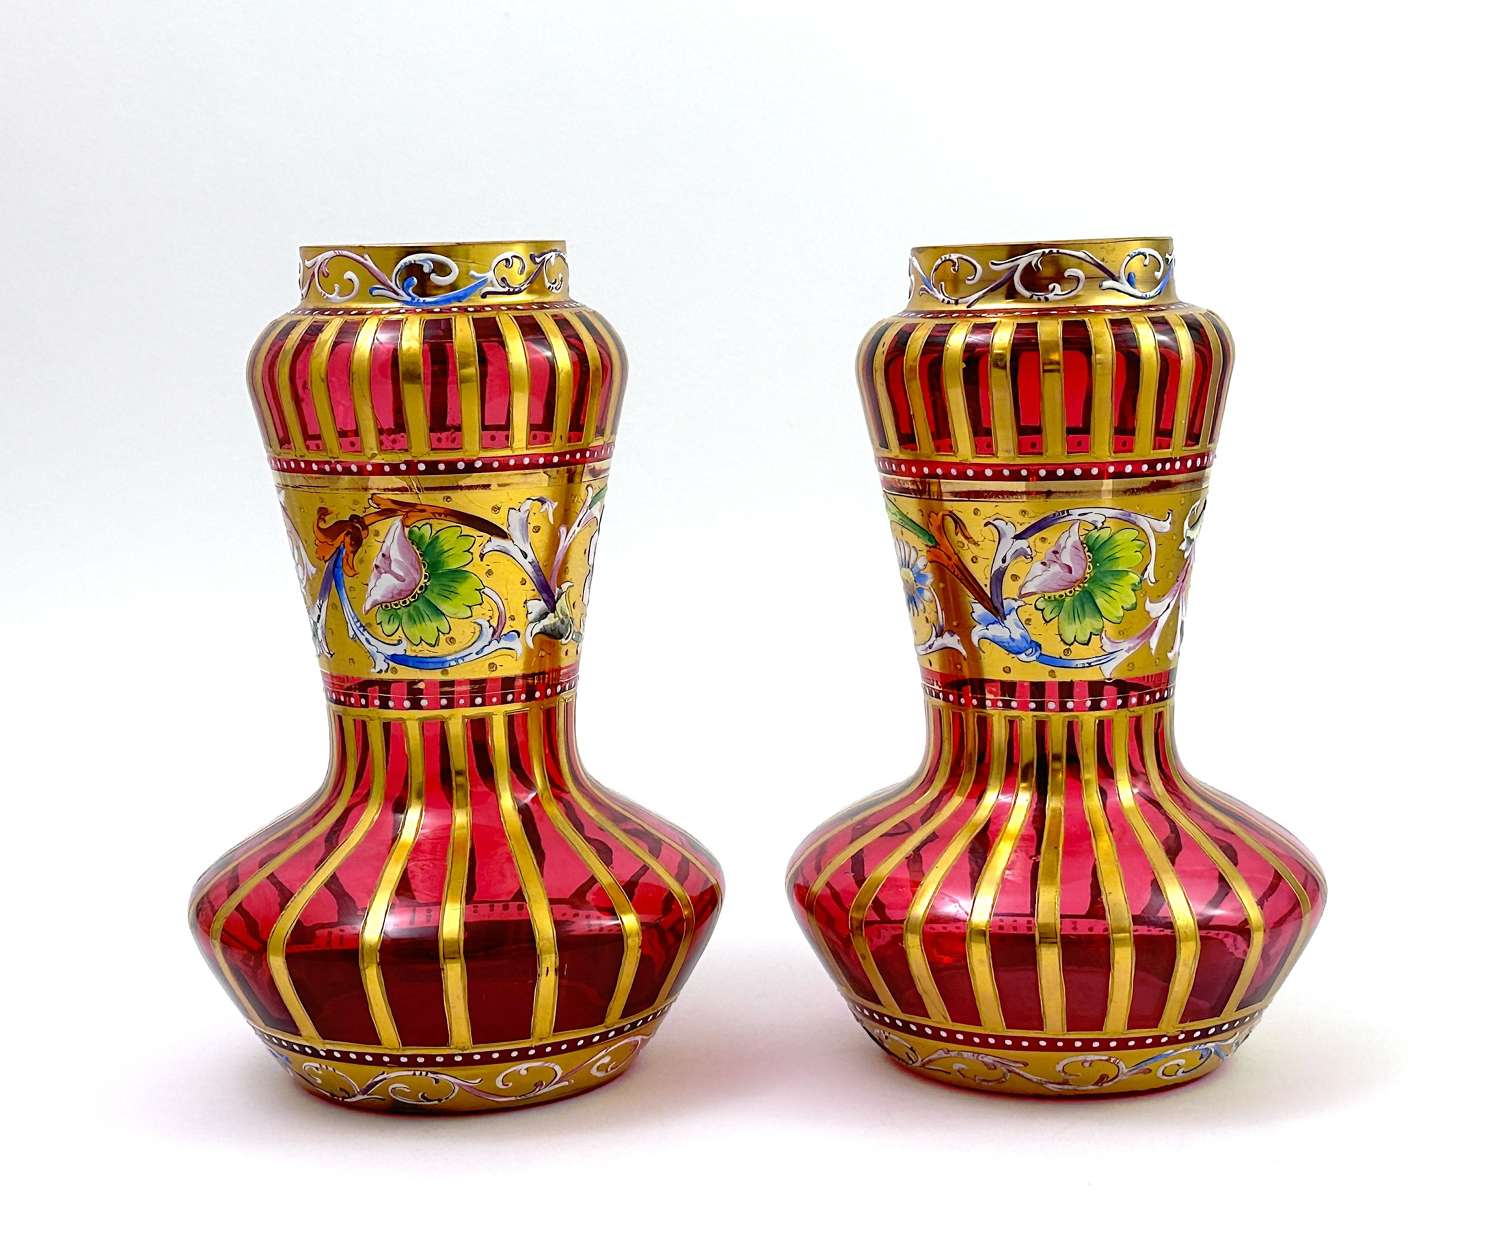 A Wonderful Pair of Antique Moser Cranberry Vases